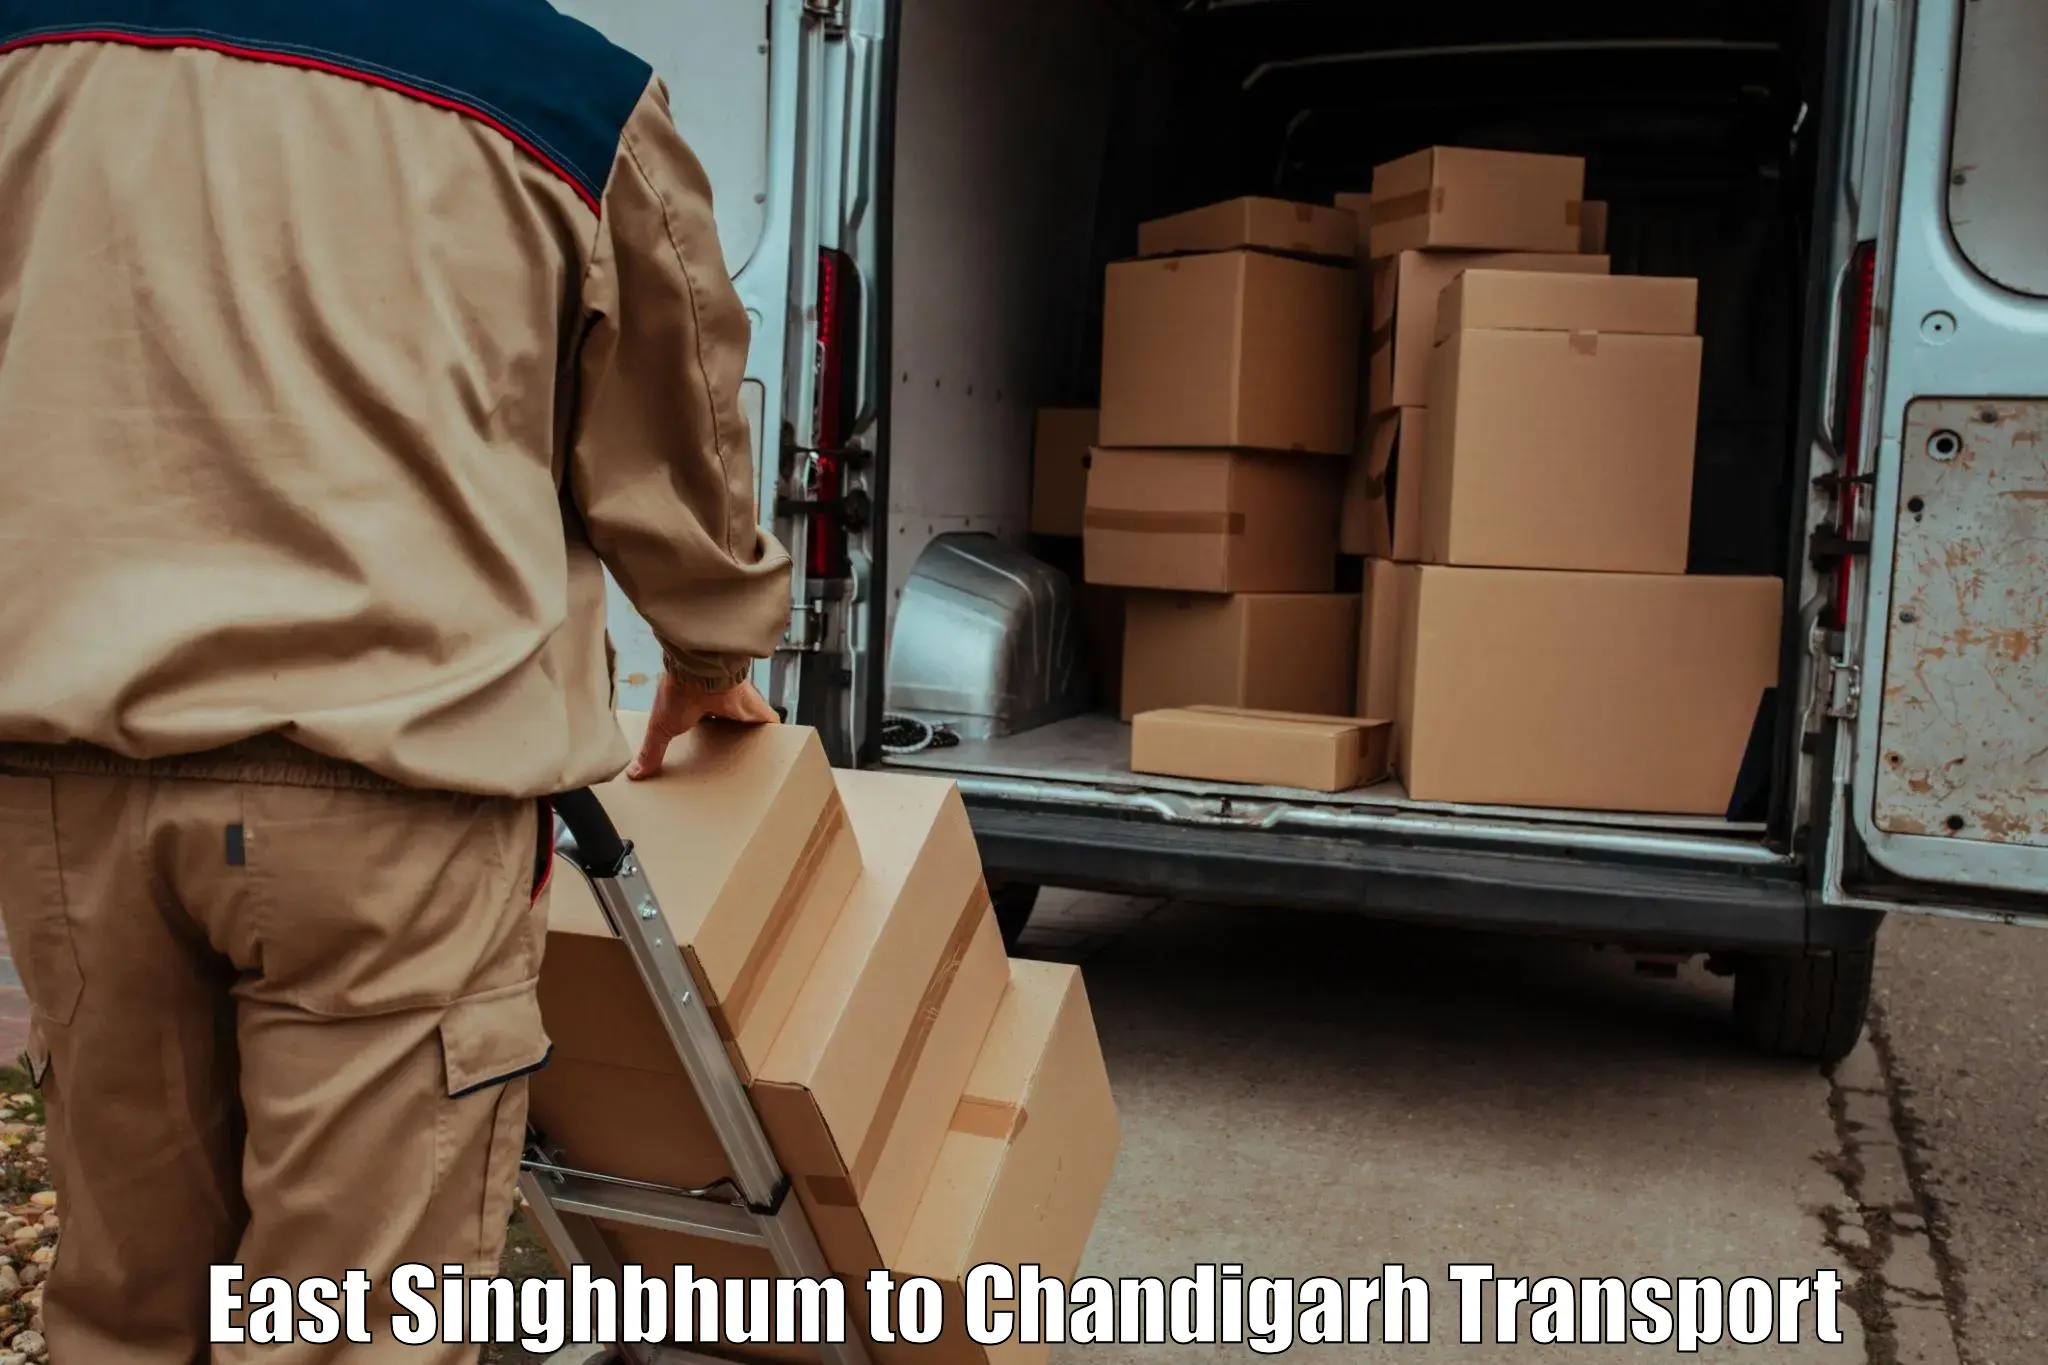 Daily transport service East Singhbhum to Chandigarh